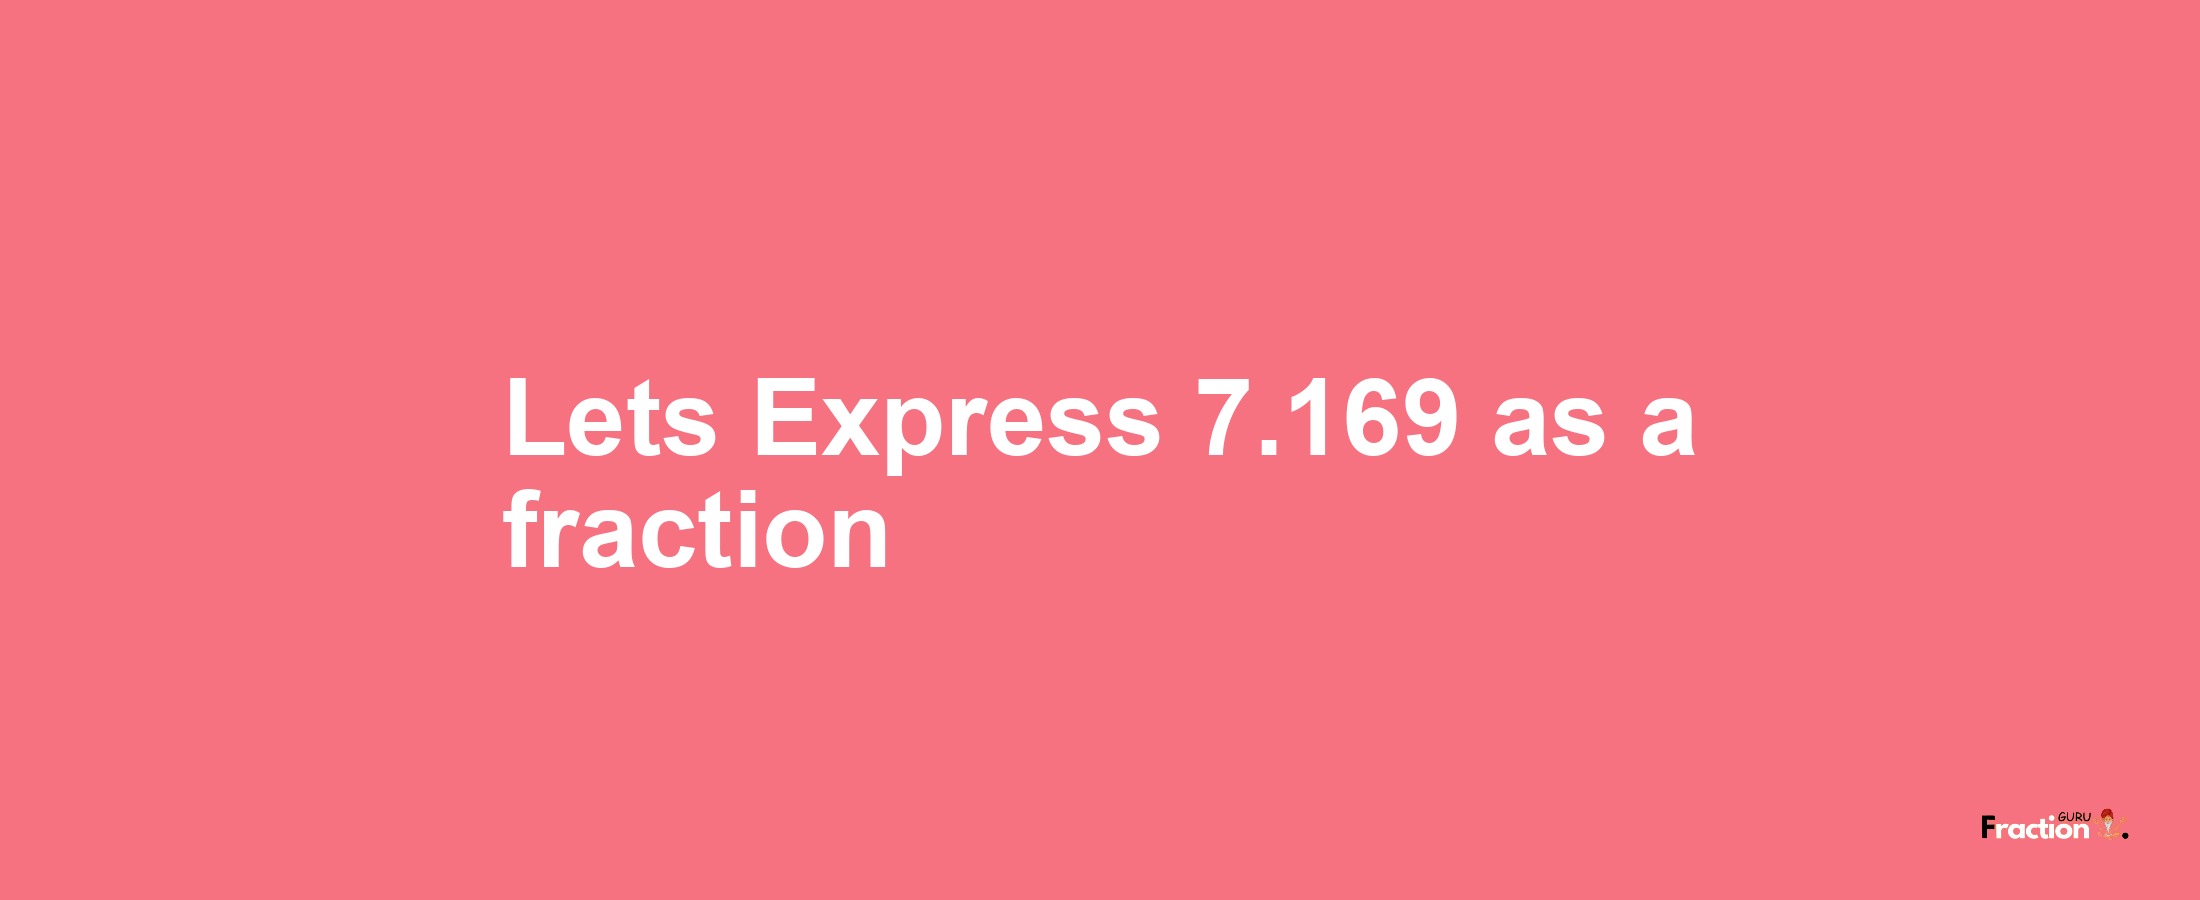 Lets Express 7.169 as afraction